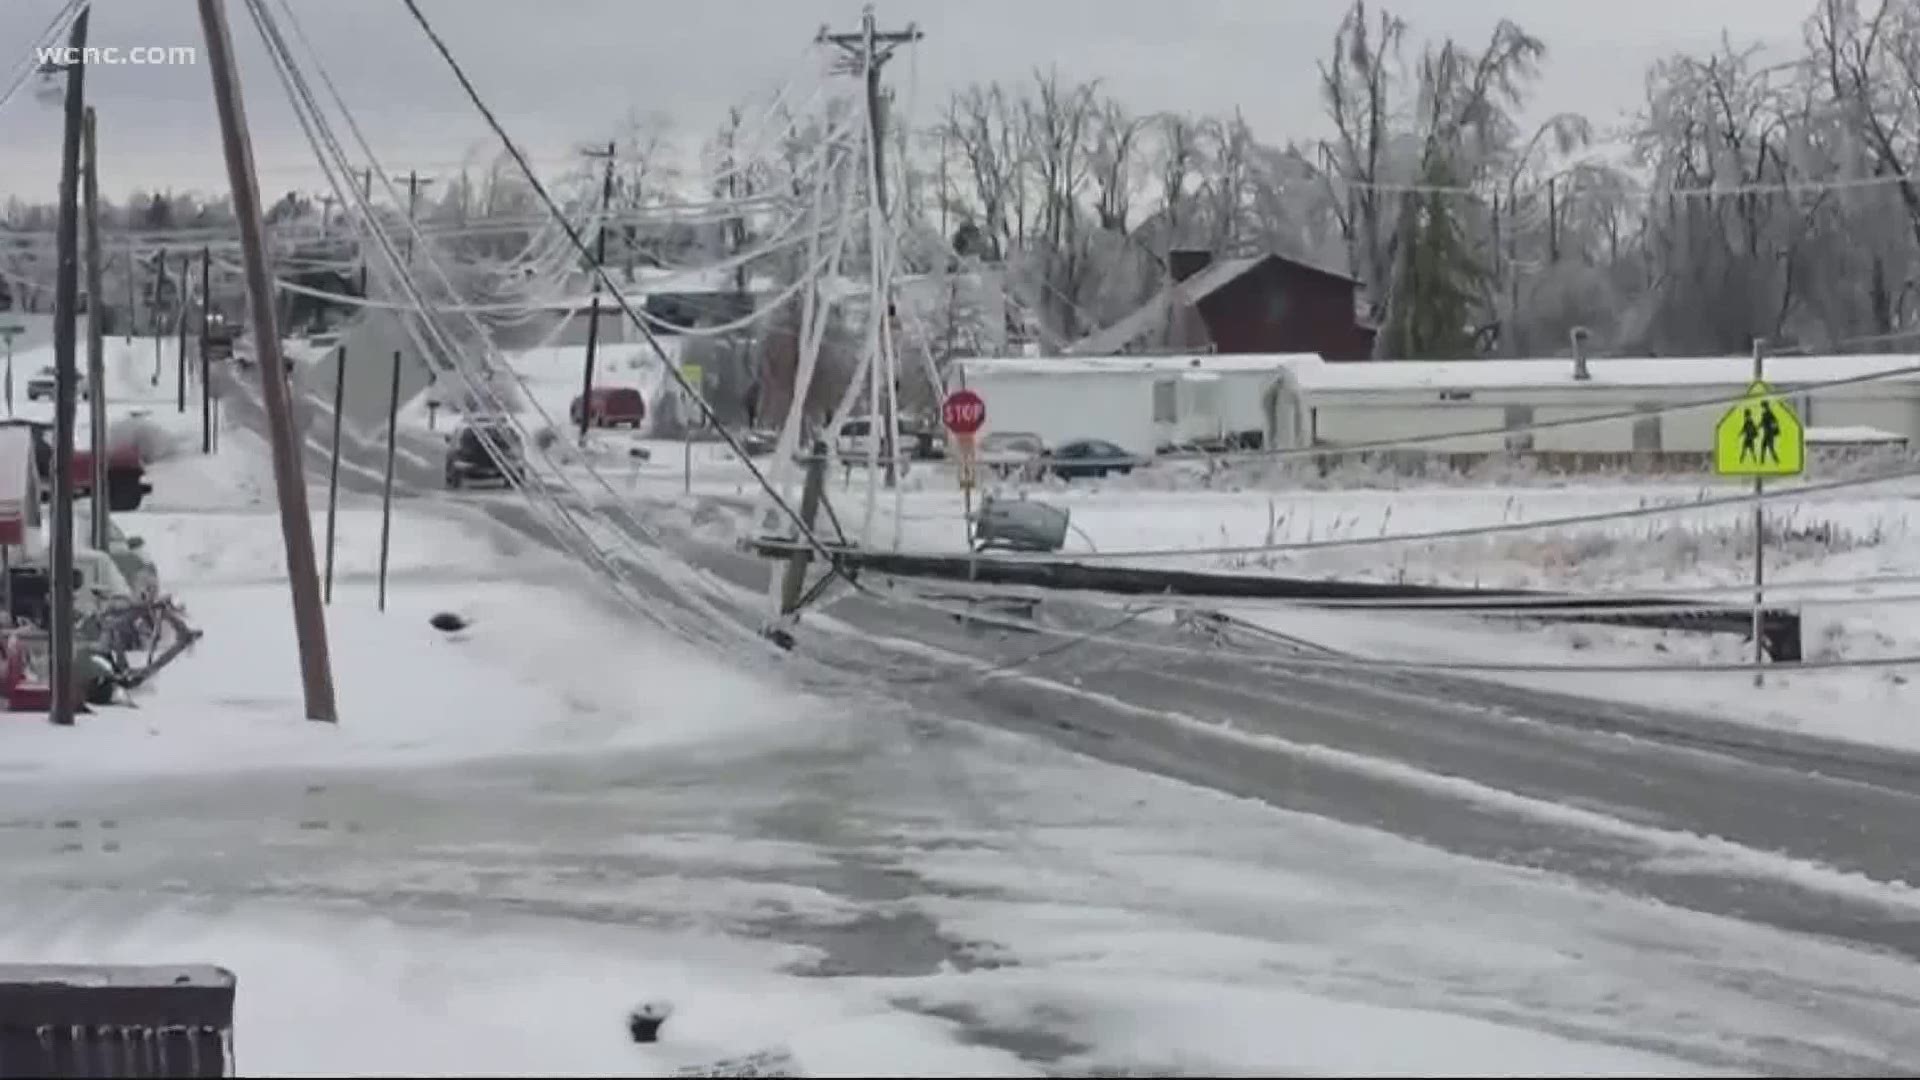 Energy United and Duke Energy have hundreds of crews working to respond to downed power lines and encouraging customers to be prepared to heat homes safely.